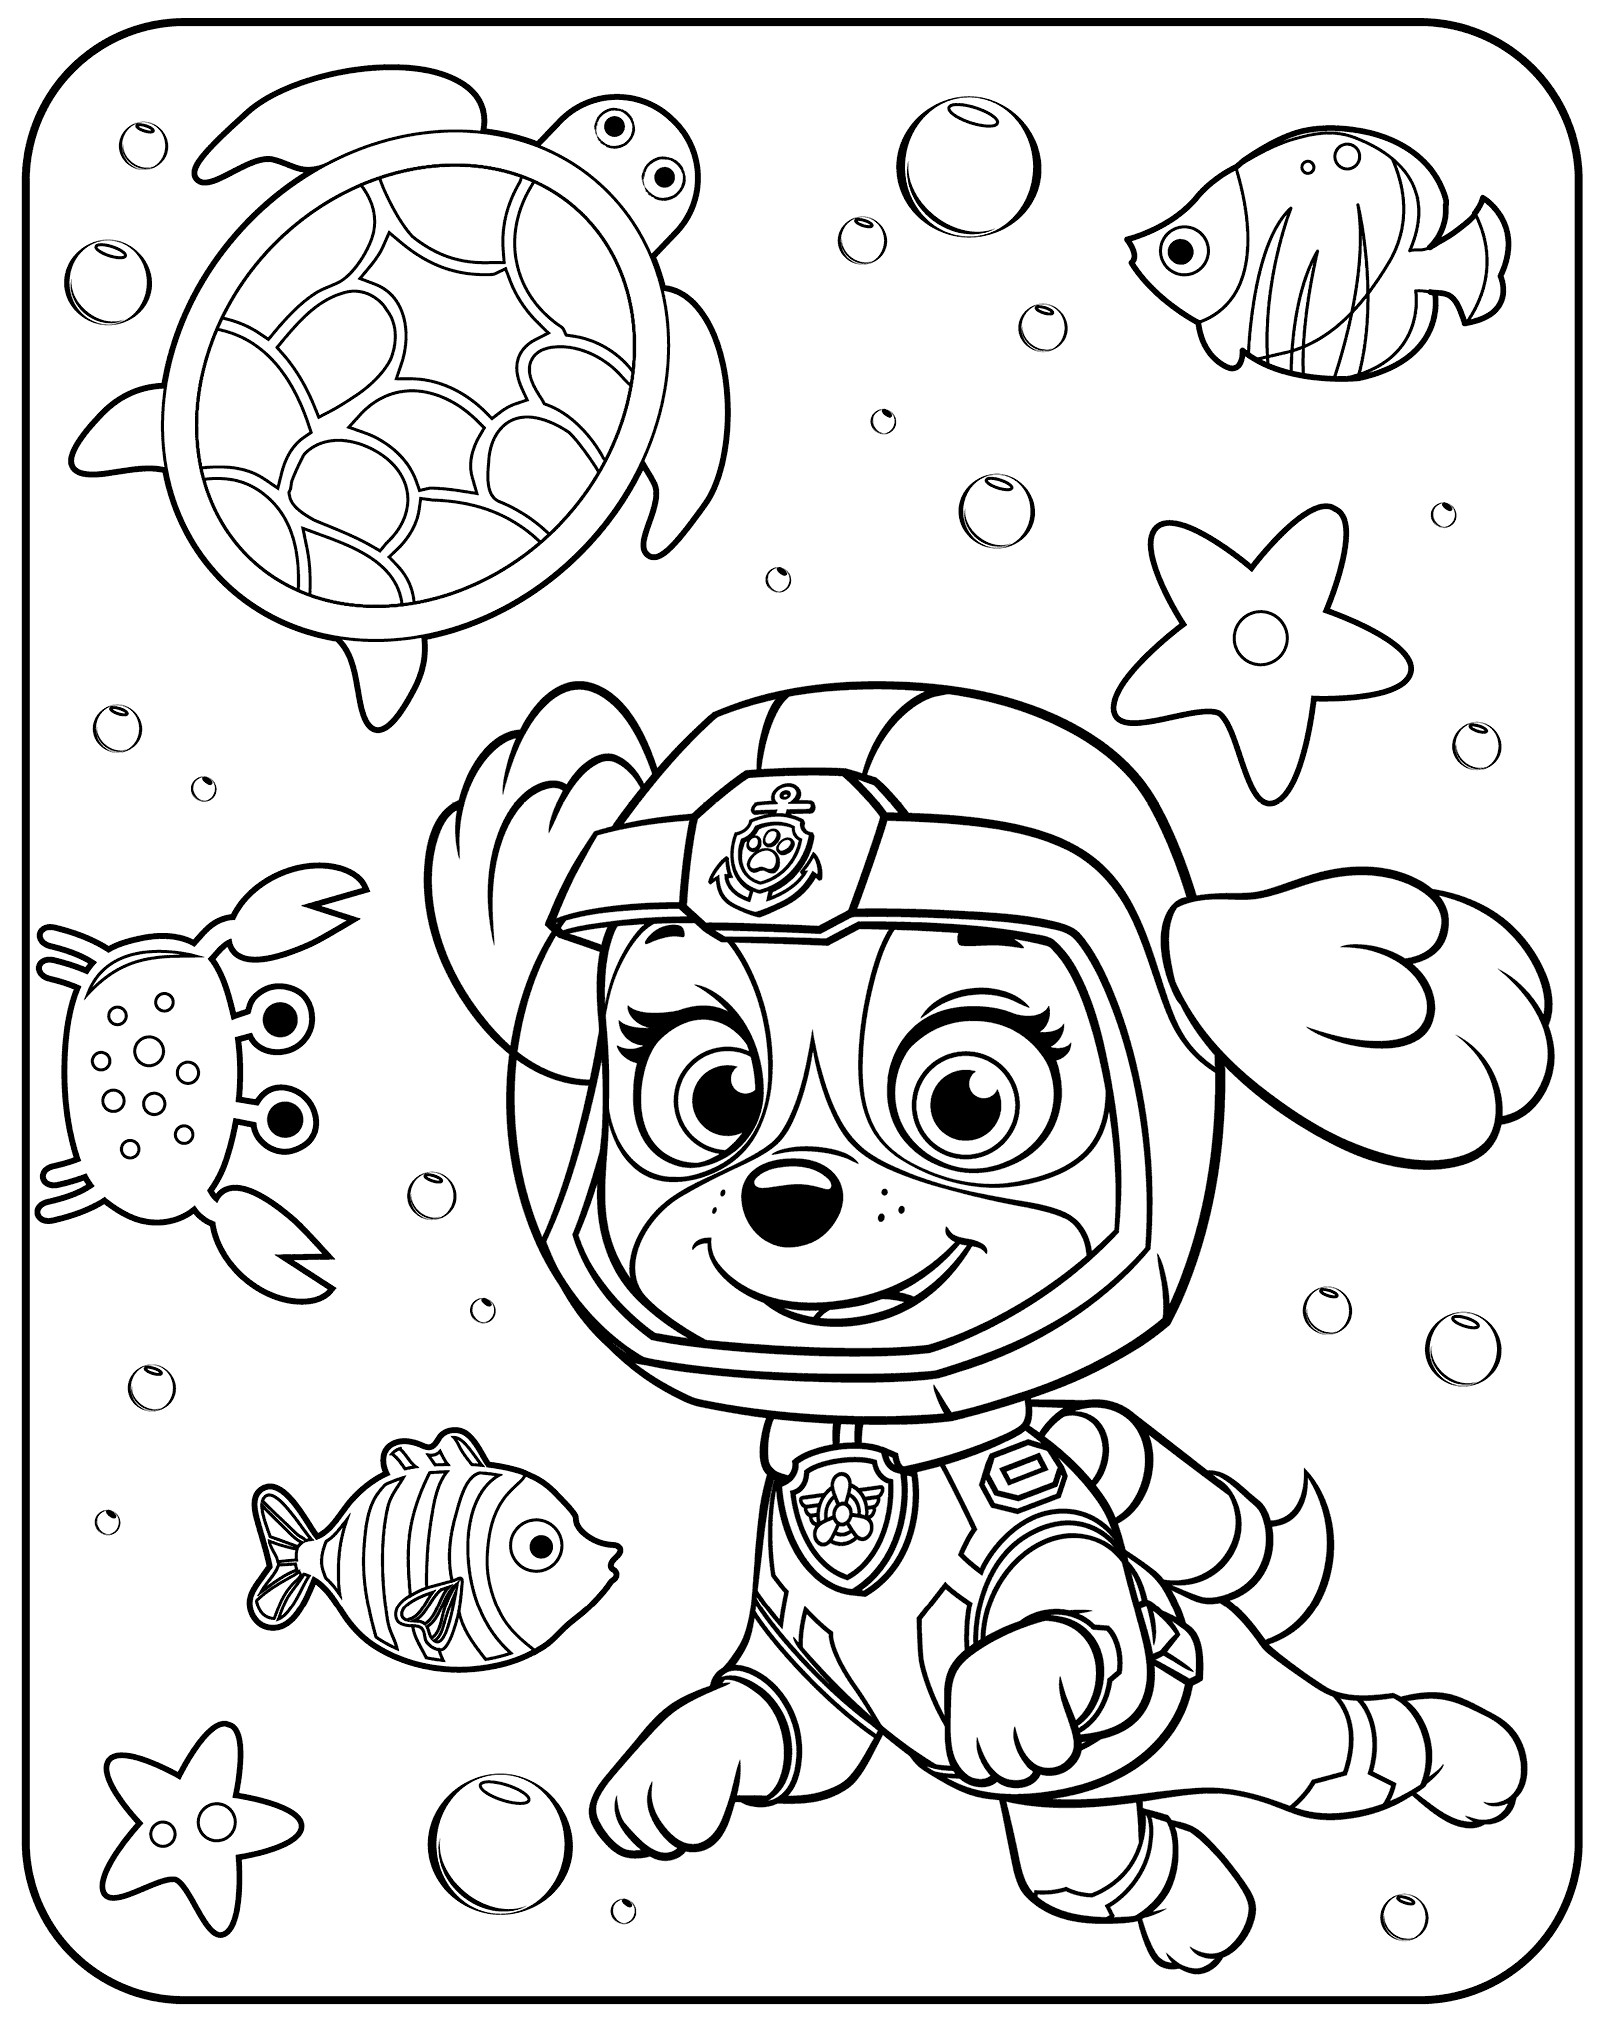 Coloring Pages : New Coloring Free Printable Paw Patrol Printables ...